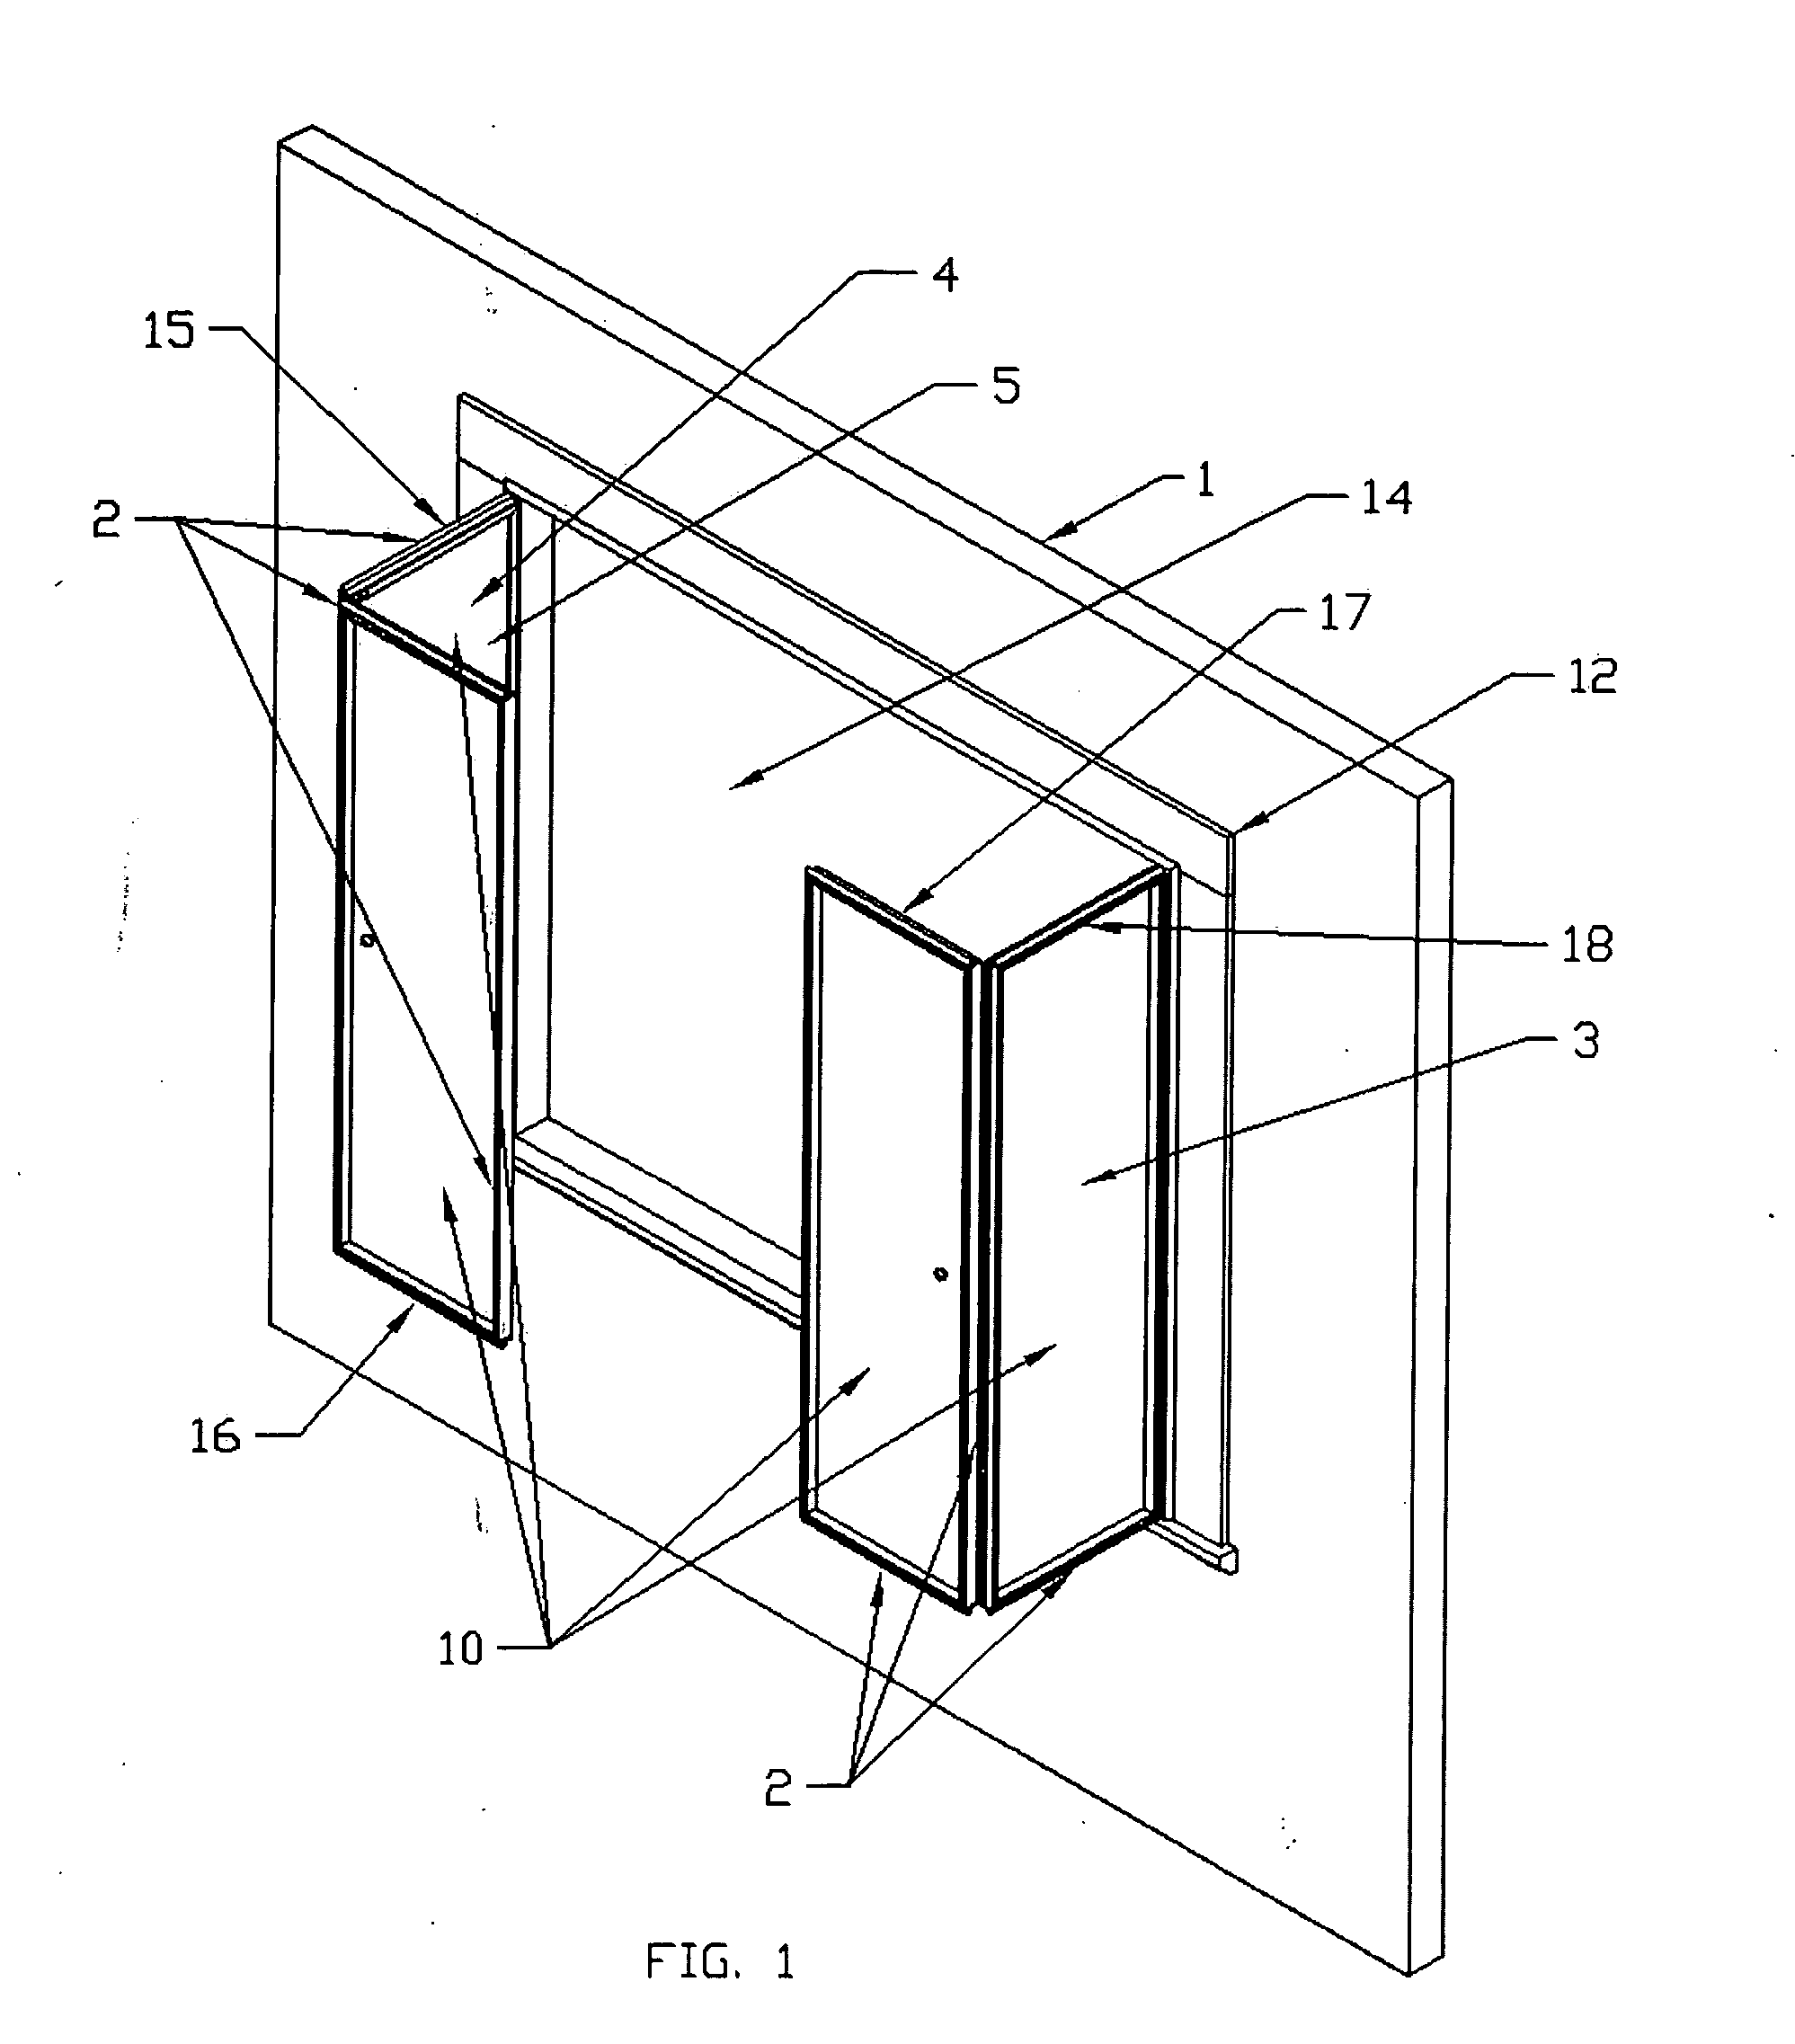 Acoustical window and door covering